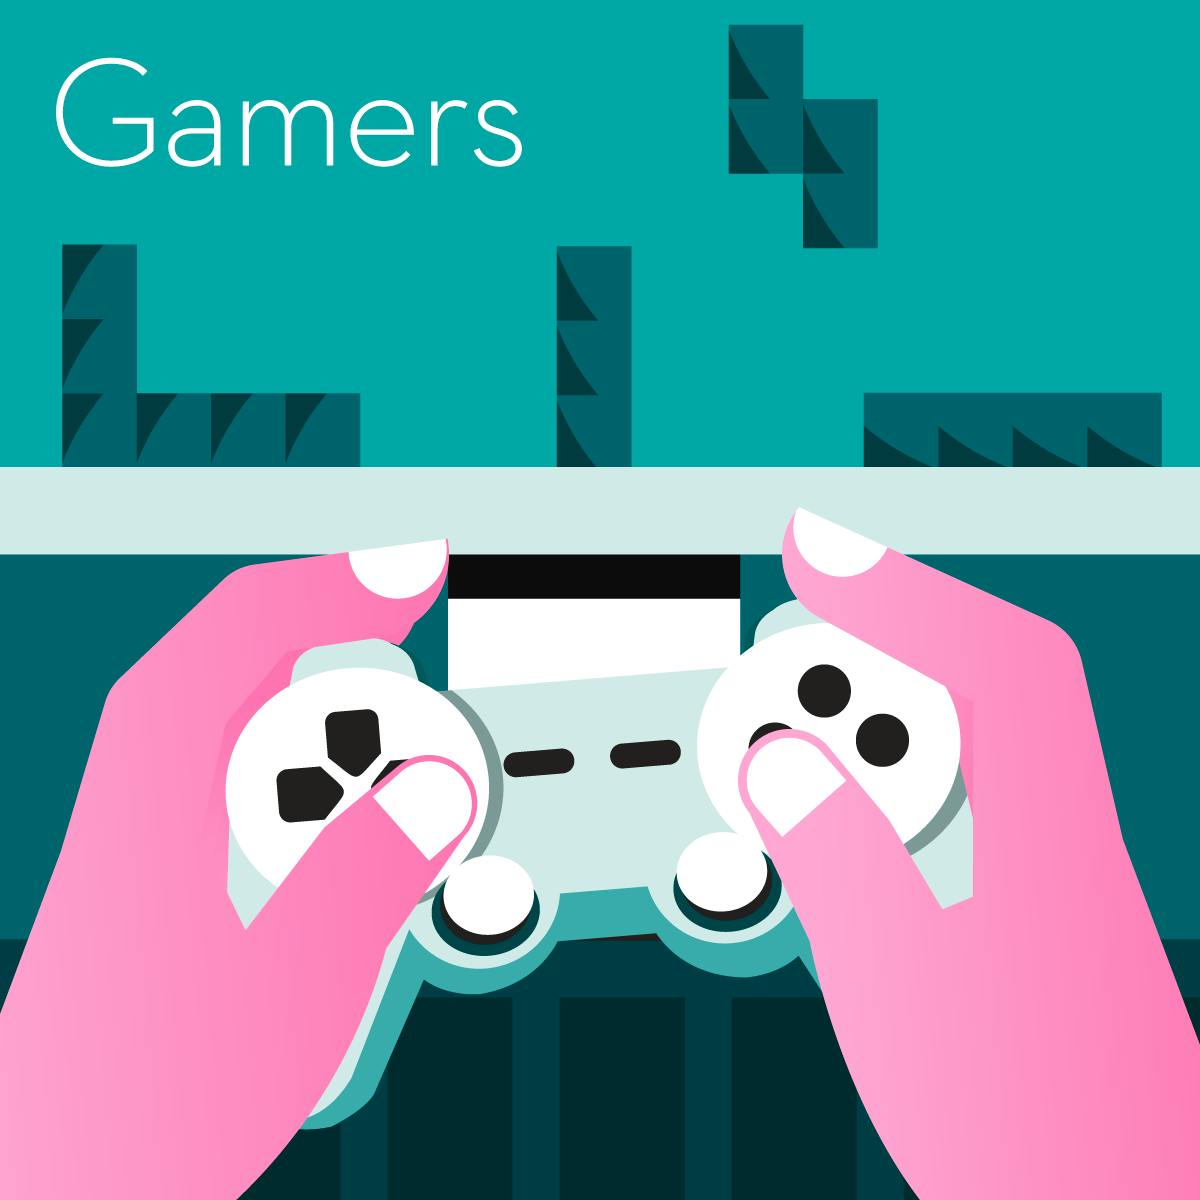 Illustration of a guide containing gifts for gamers, showing a pair of hands holding a game controller.